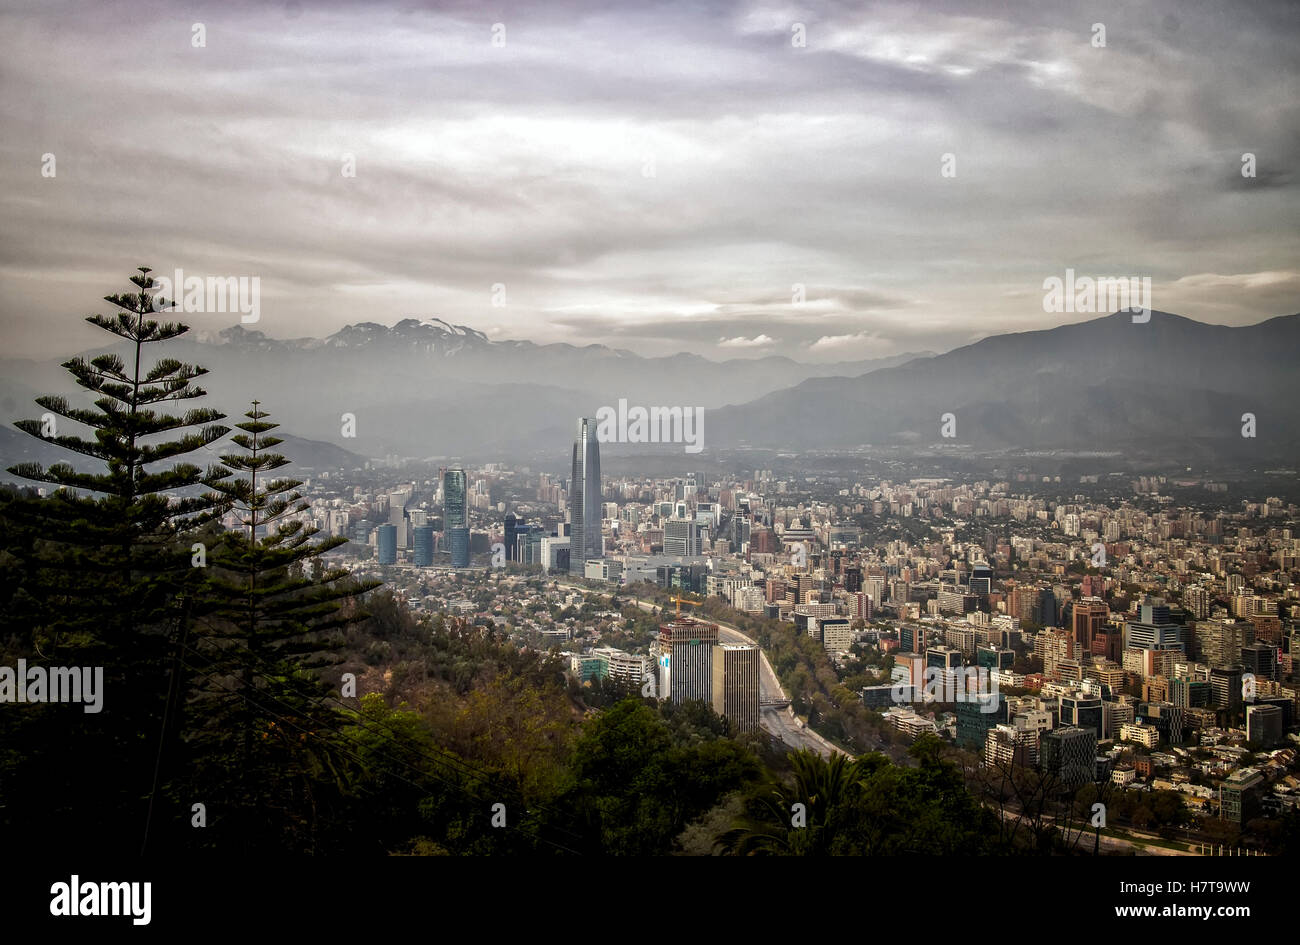 Skyline view of Chile's capital city Santiago against a backdrop of the Andes Mountains from above. Stock Photo